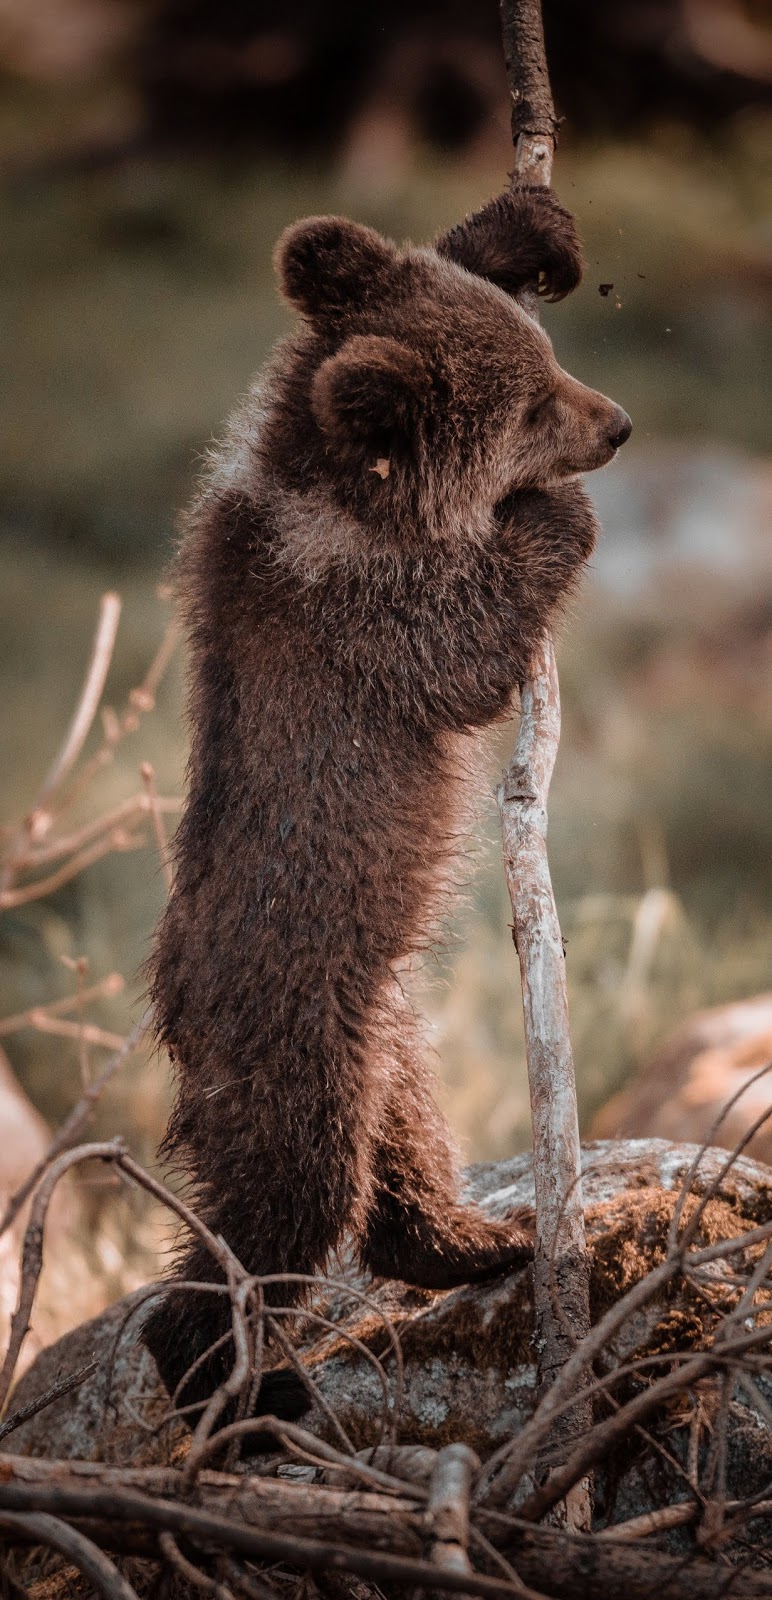 Young bear playing with a stick.